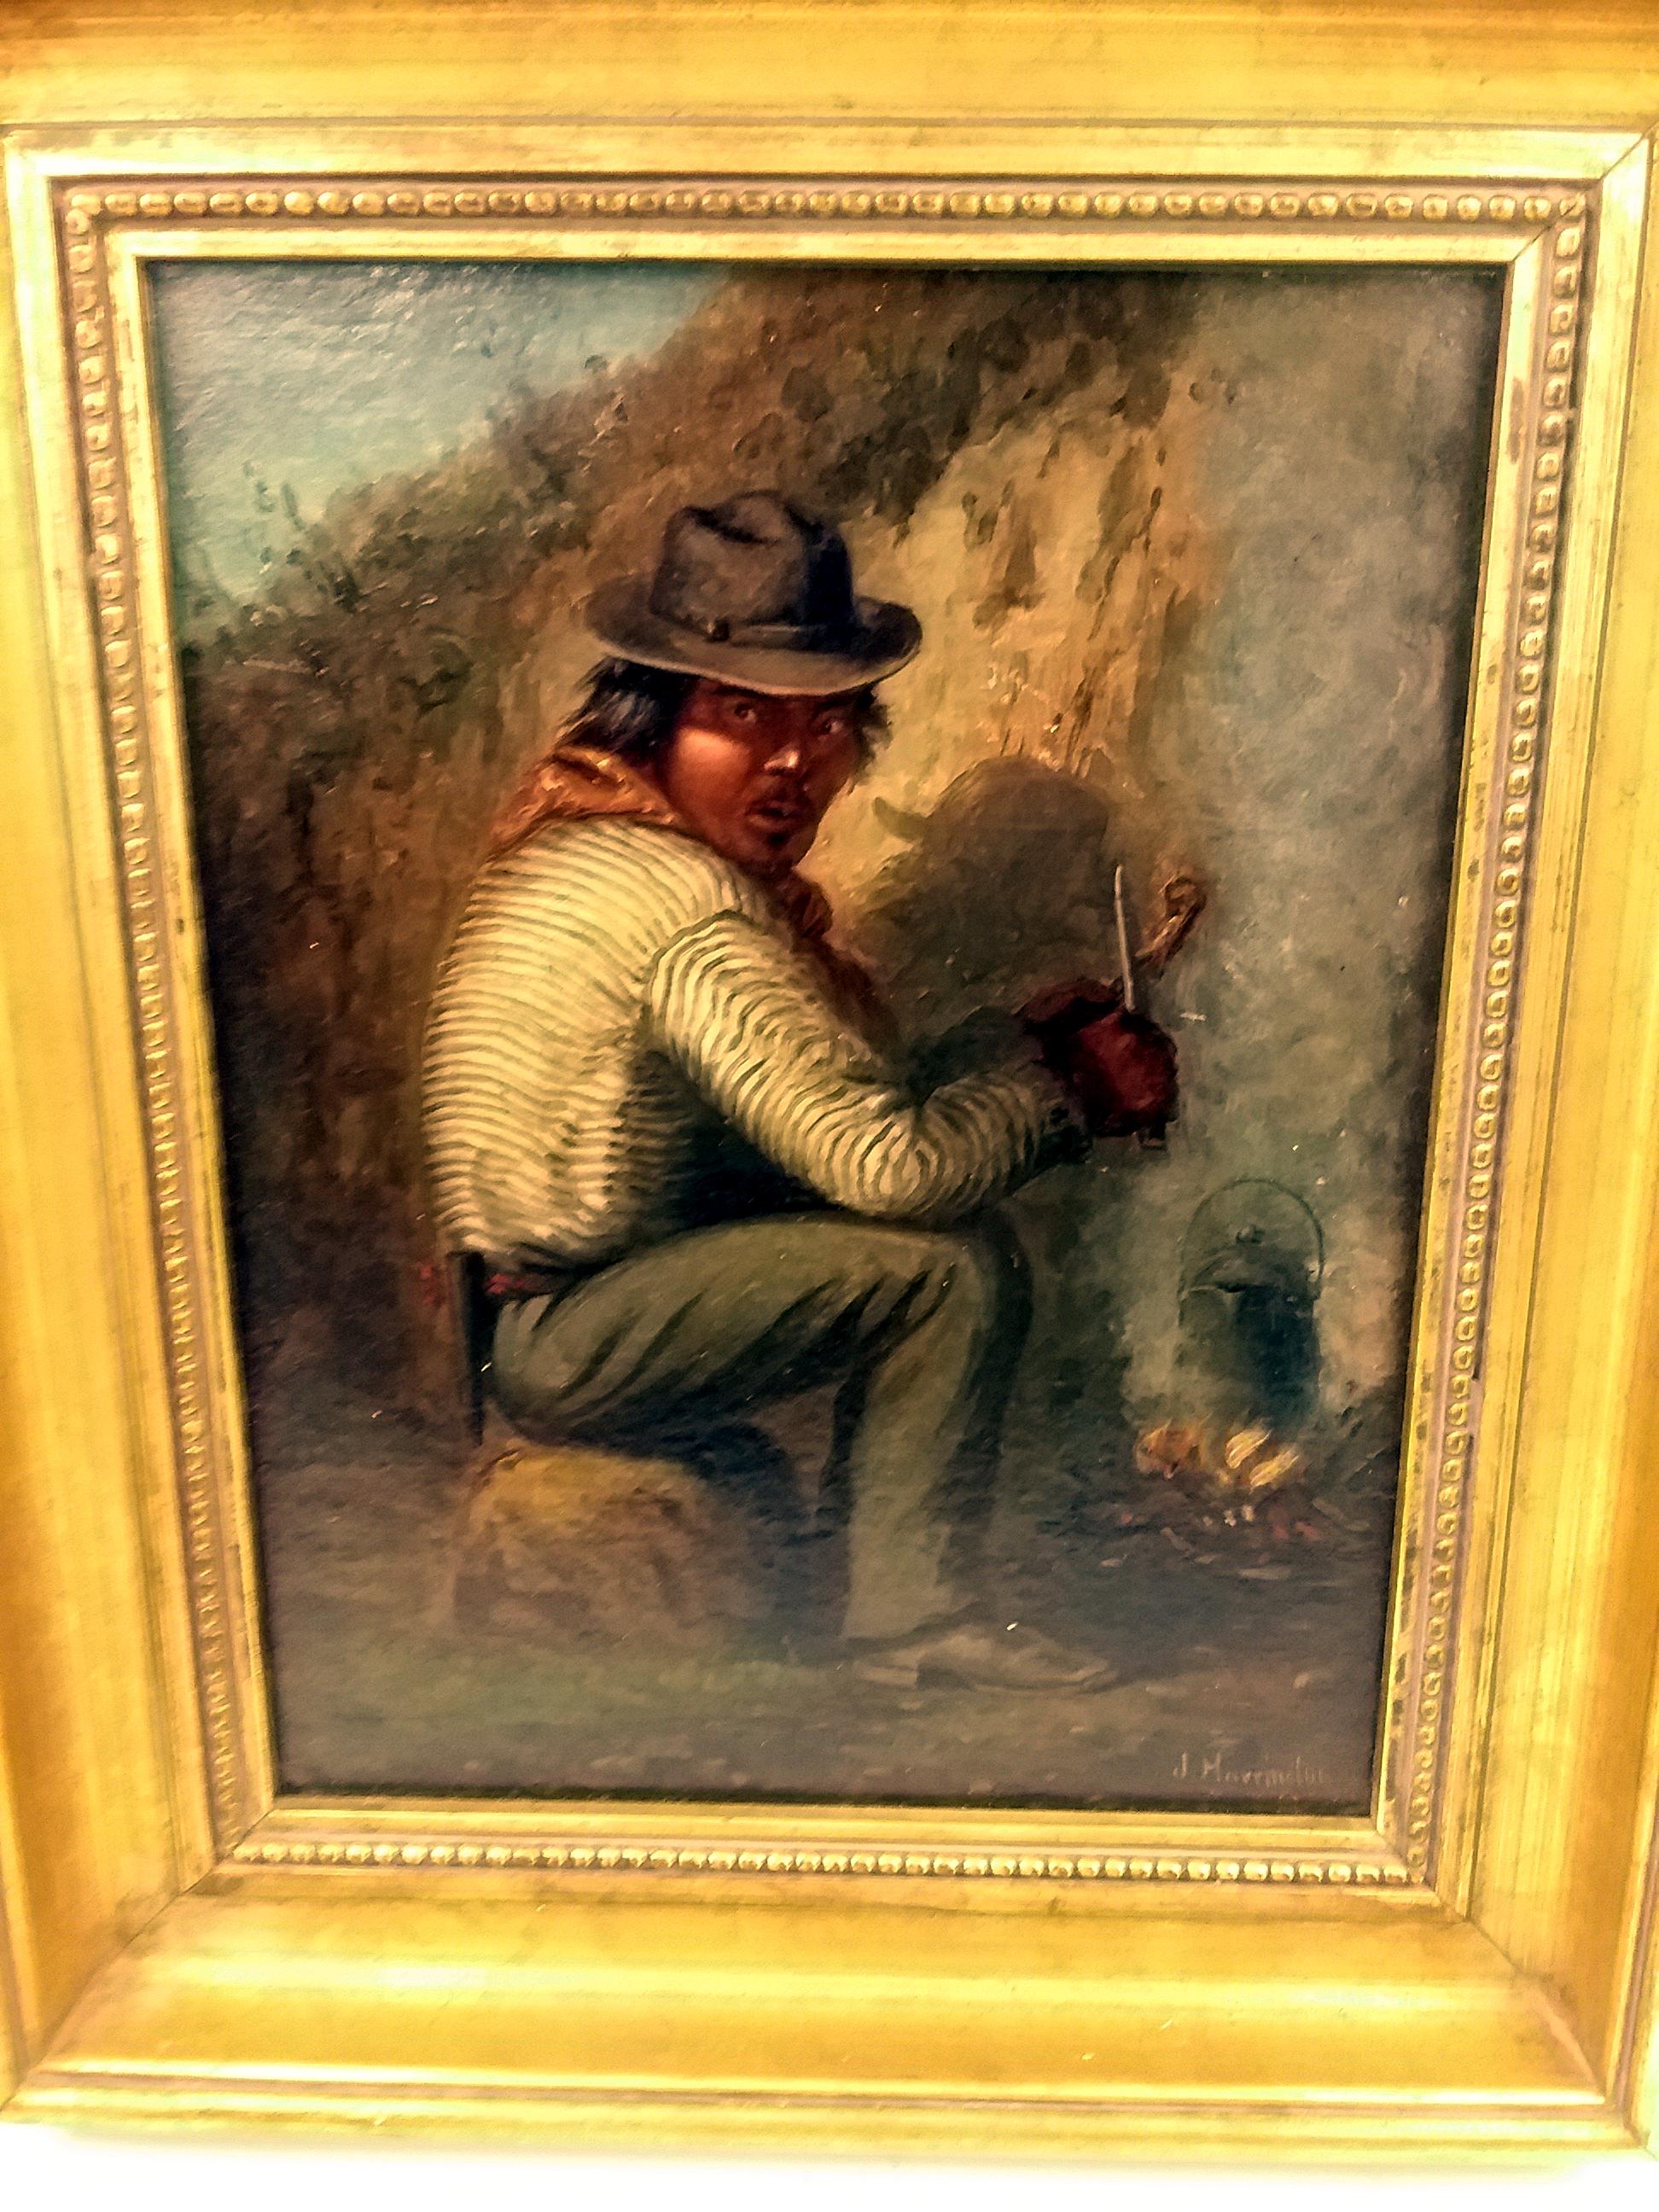 A beautiful signed oil on canvas by artist Joseph A. Harrington, depicting a south-west Indian traveler peering over his shoulder at the viewer as if suspicious of their presence, as if the painter snuck up on the unpropitious camper, hassling the